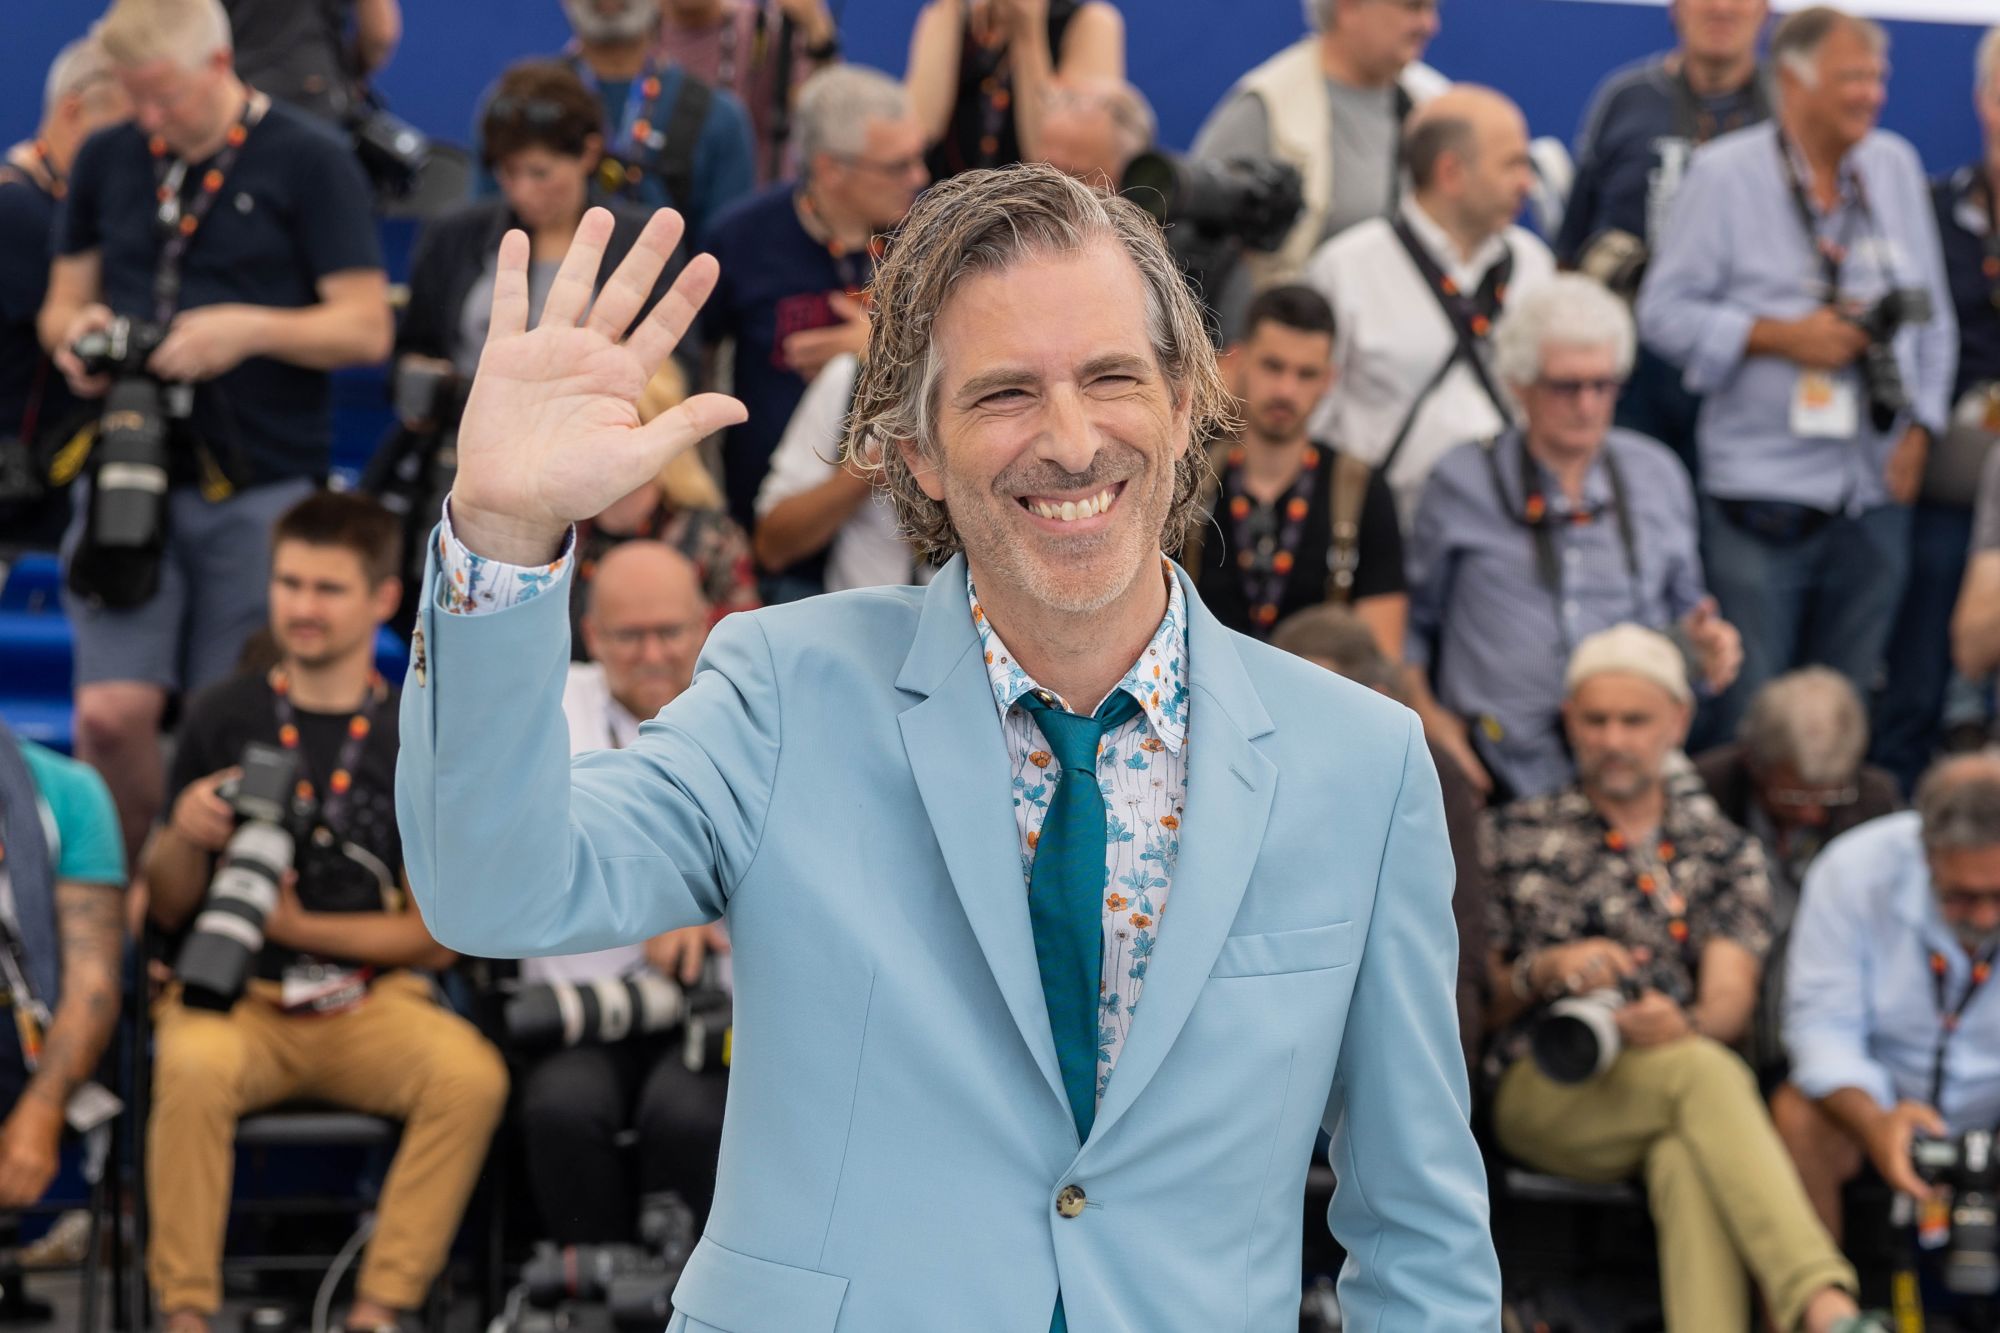 CANNES, FRANCE - MAY 23: Director Brett Morgen attends the photocall for "Moonage Daydream" during the 75th annual Cannes film festival at Palais des Festivals on May 23, 2022 in Cannes, France. @ Olivier BORDE